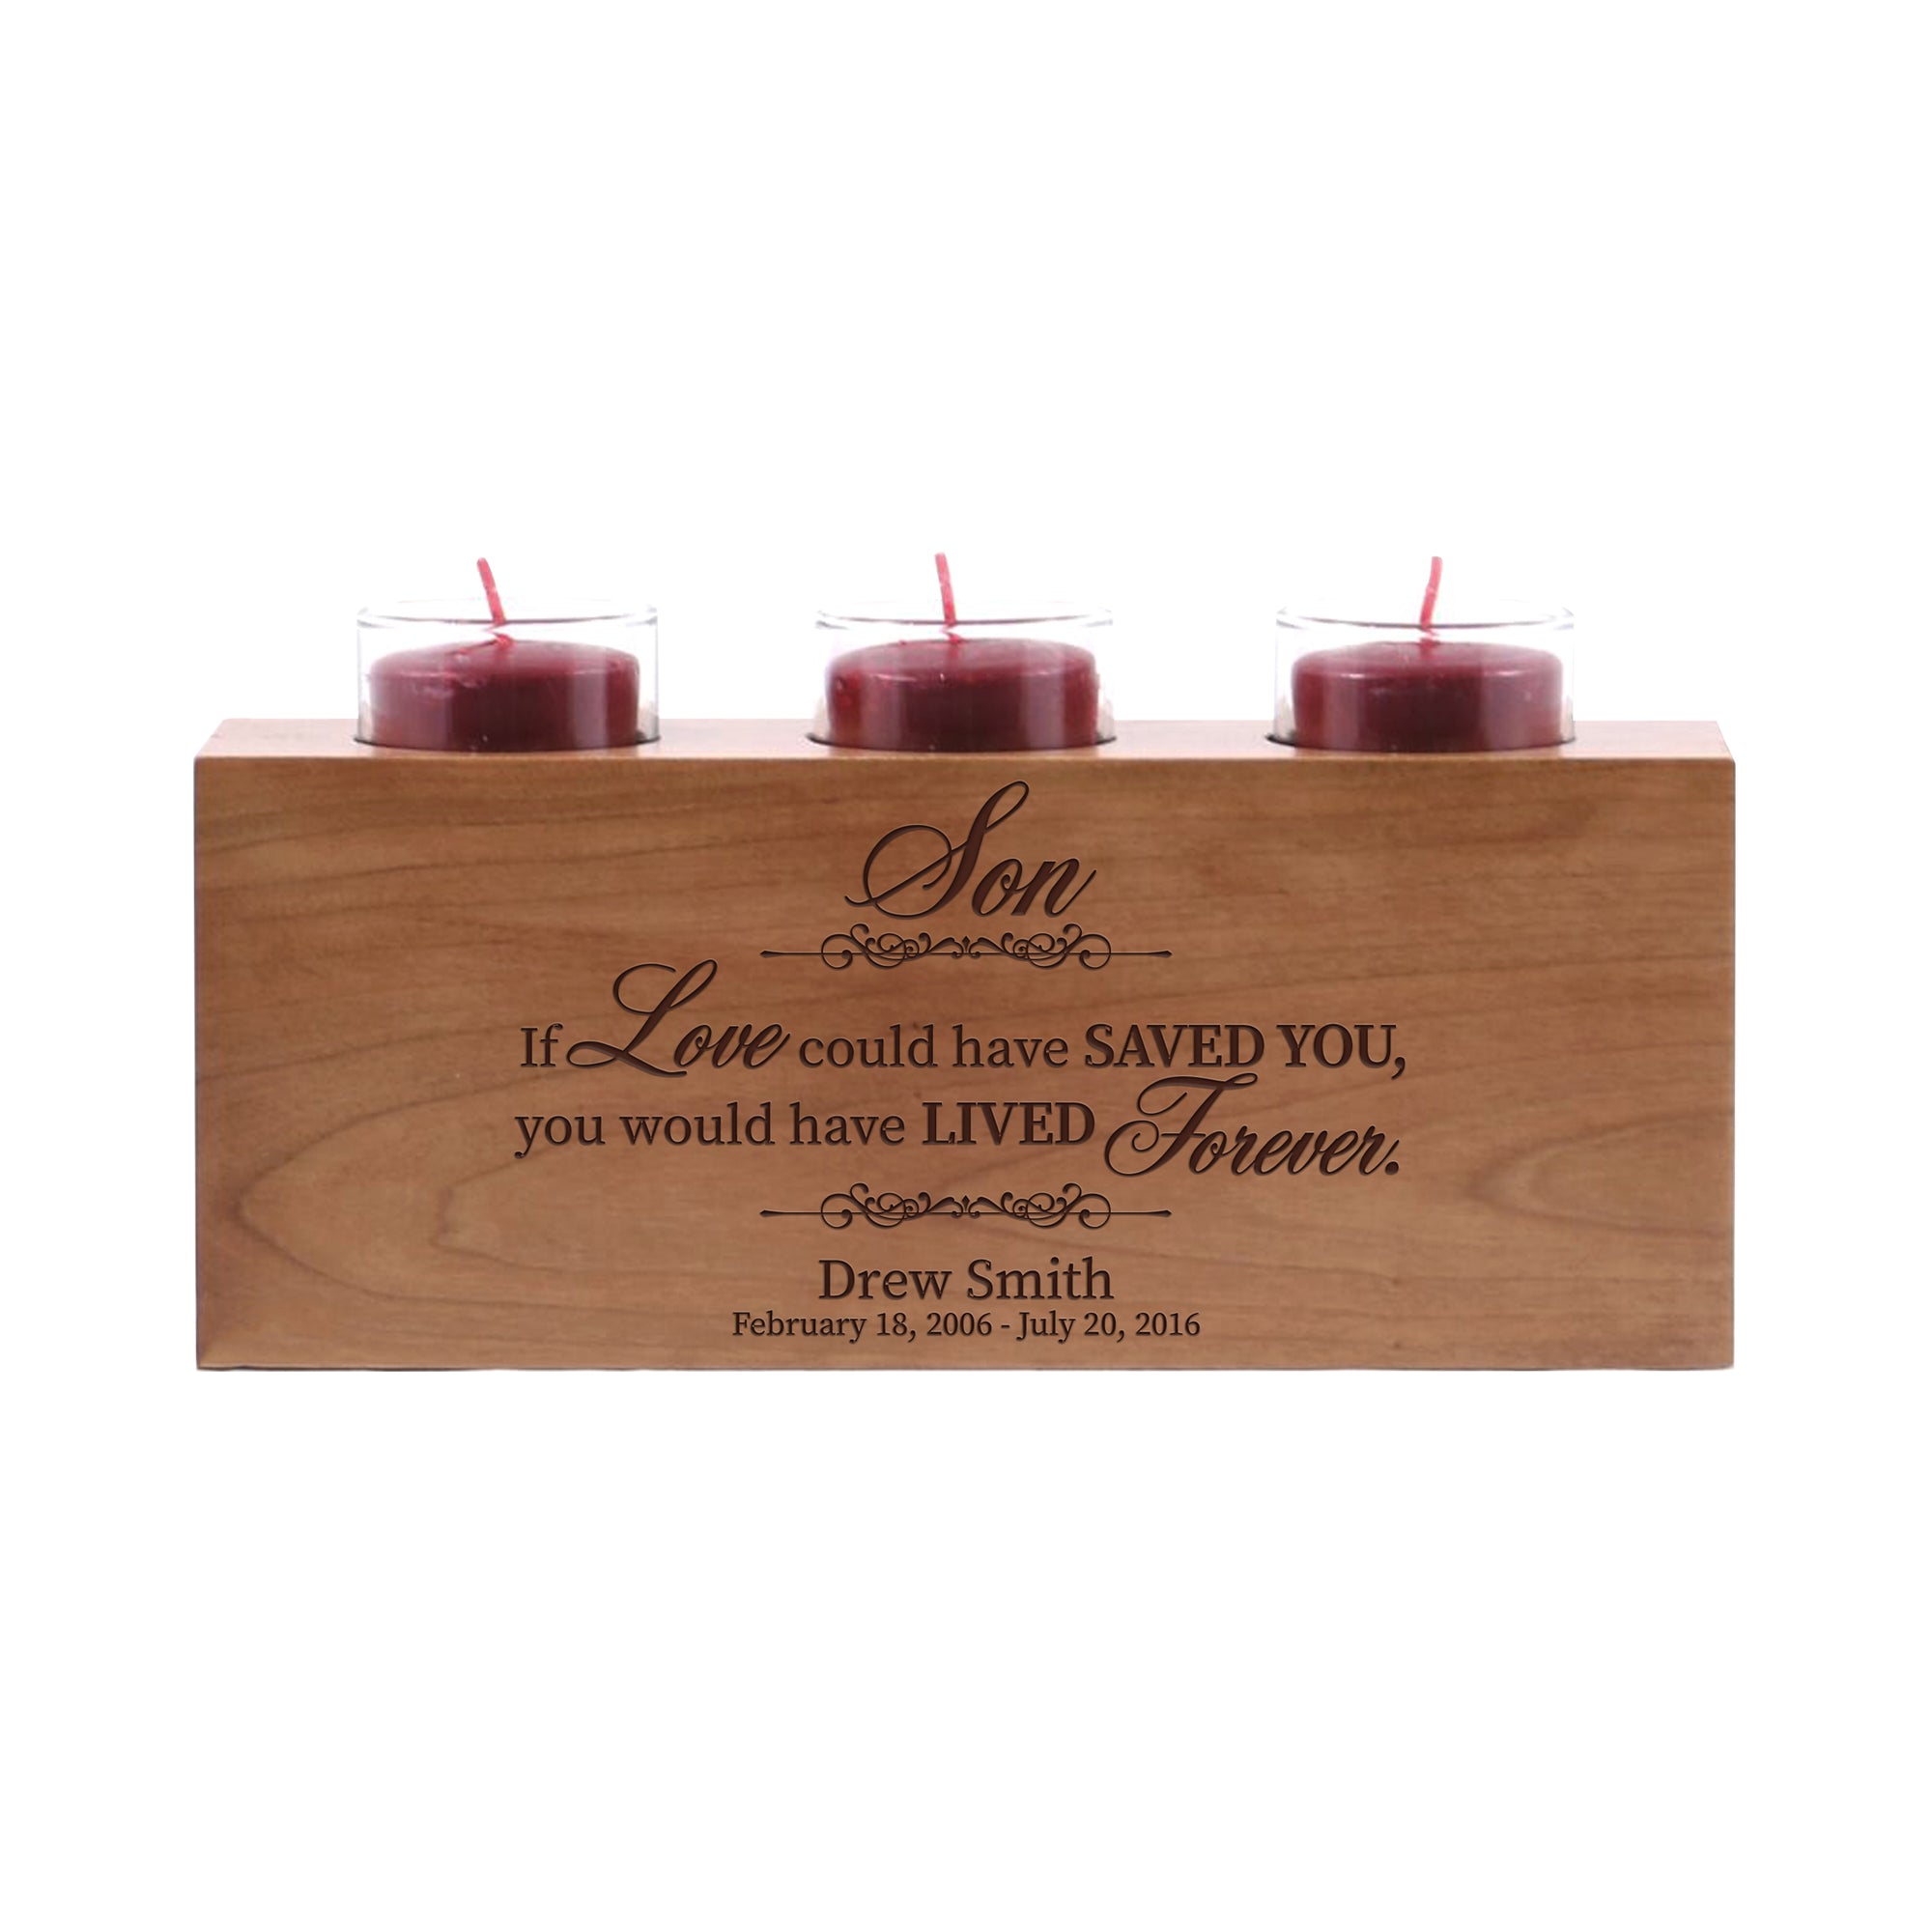 LifeSong Milestones Personalized Memorial Sympathy 3 Votive Candle Holder - Son, If Love Could Engraved Tea Light Candle Loss of Loved One Gift - 10” x 4” x 4”.